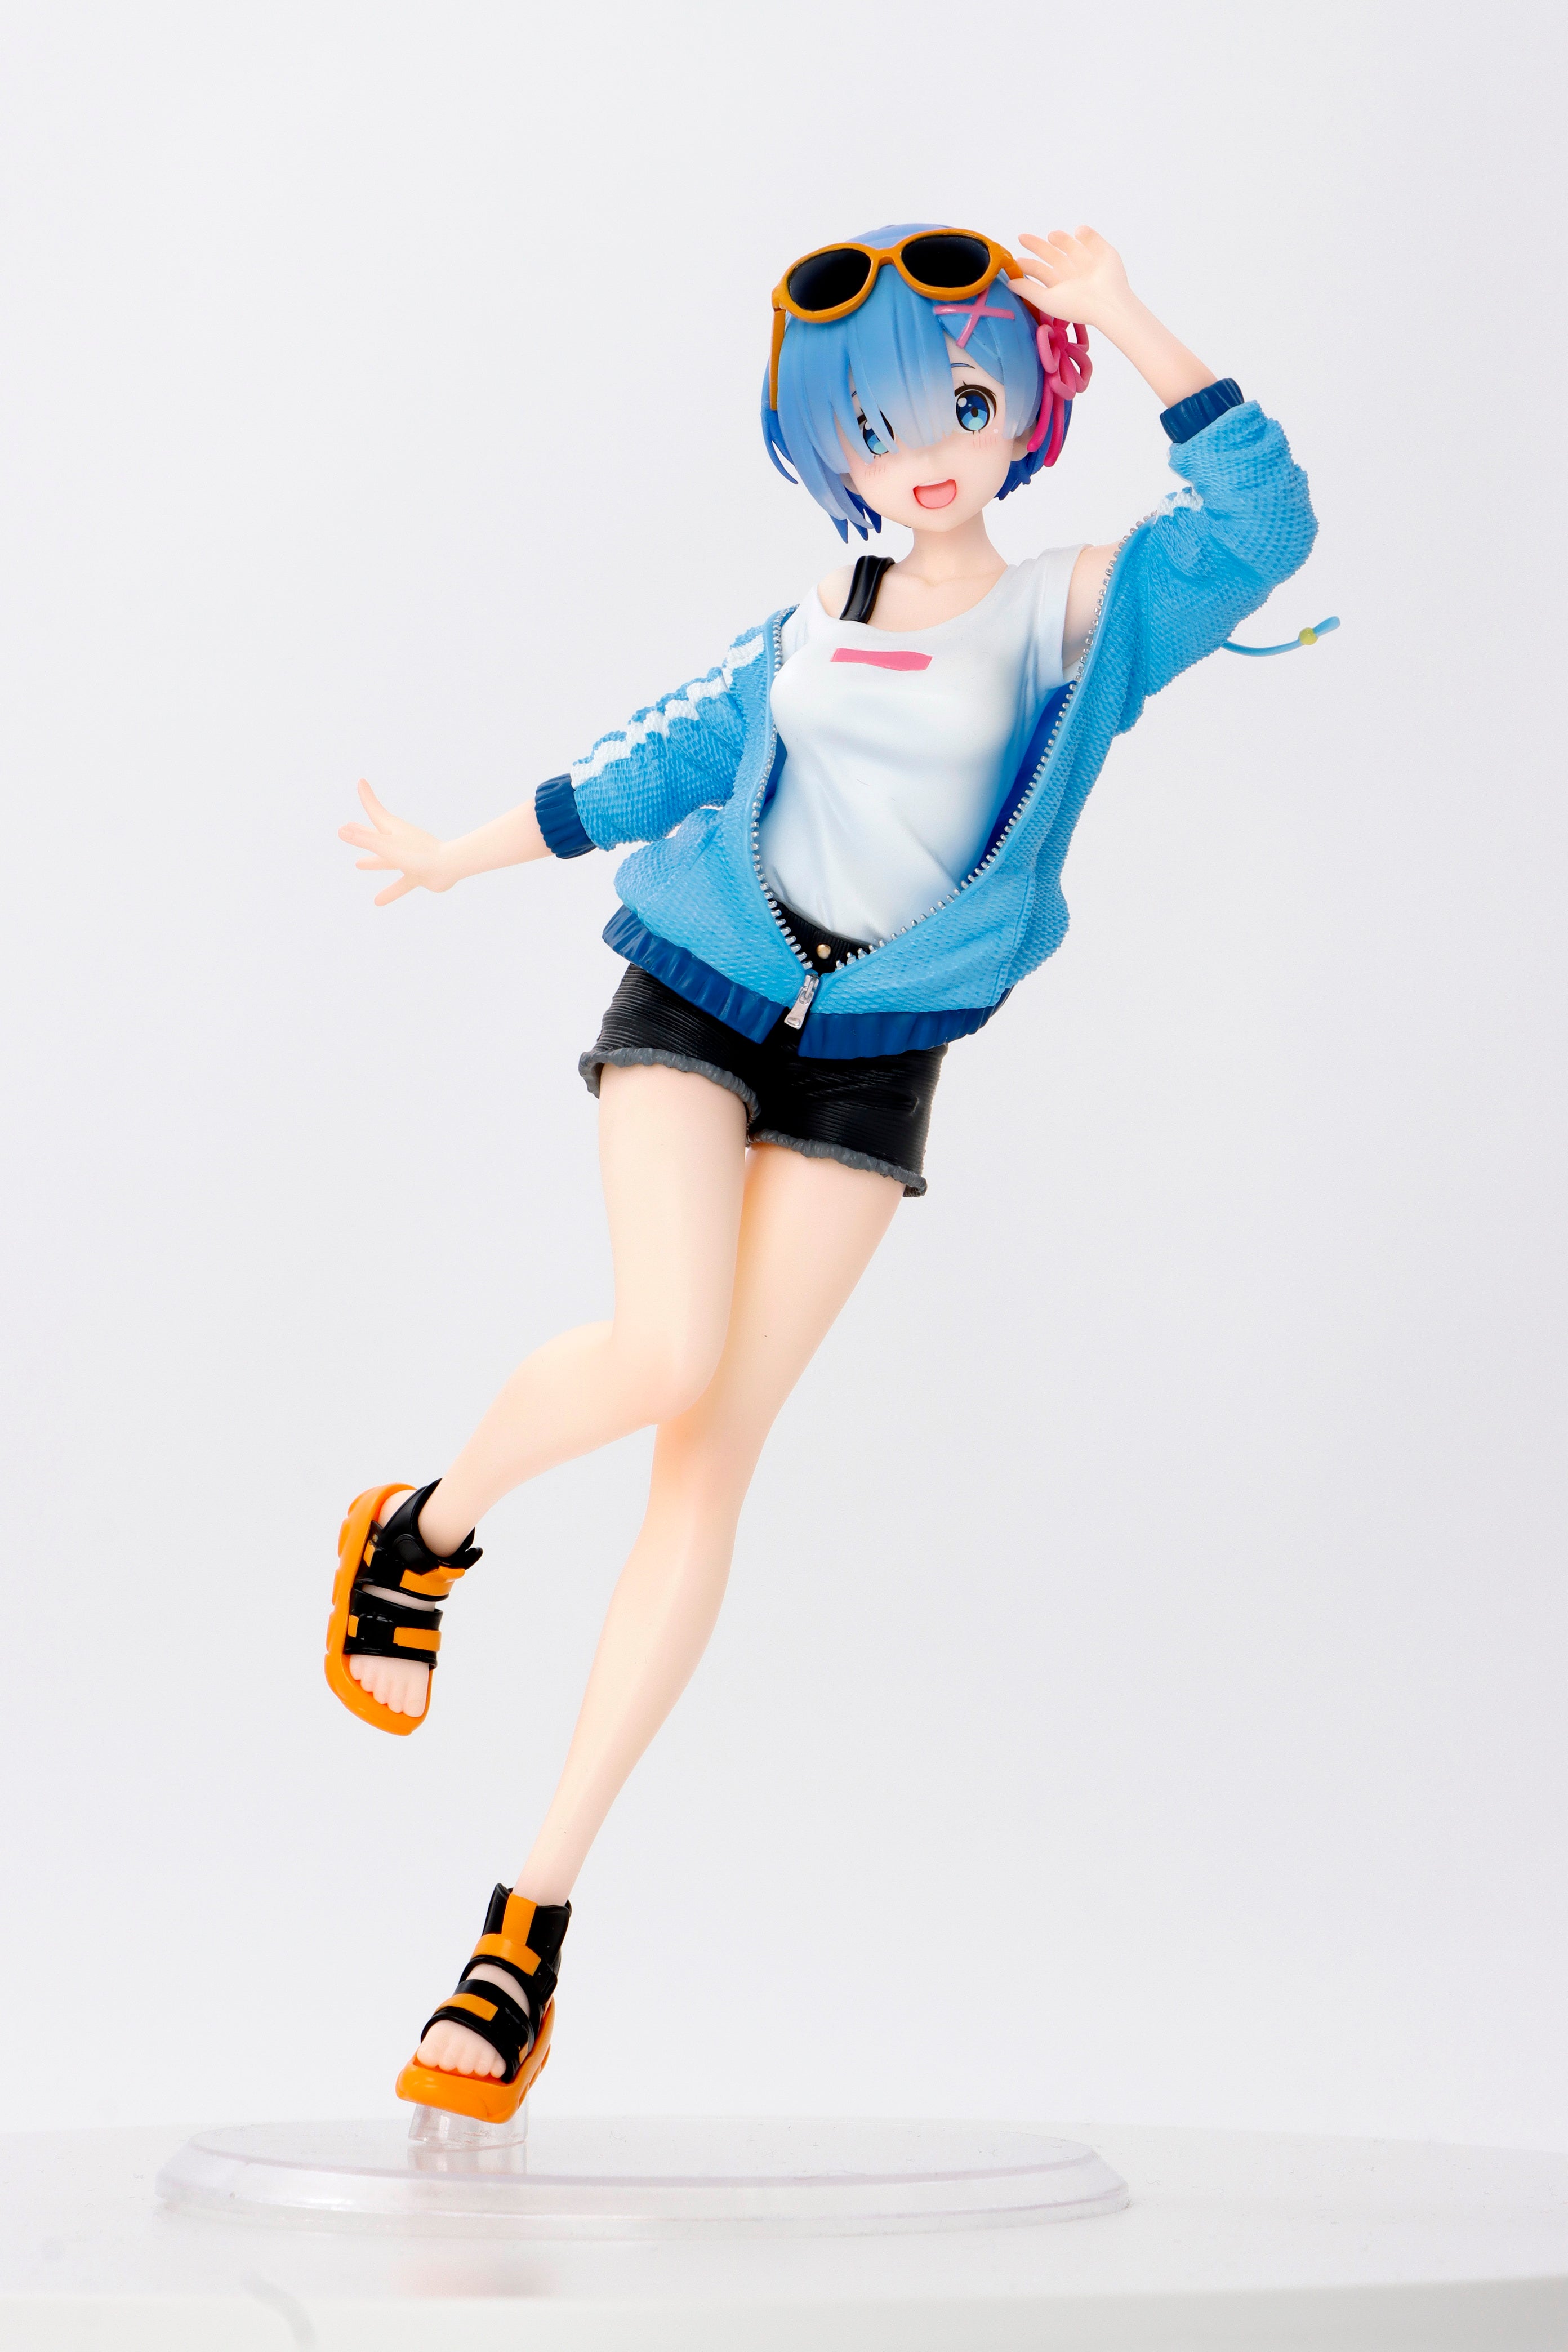 PRE-ORDER Re:ZERO -Starting Life in Another World Precious Figure - Rem: Sporty Summer